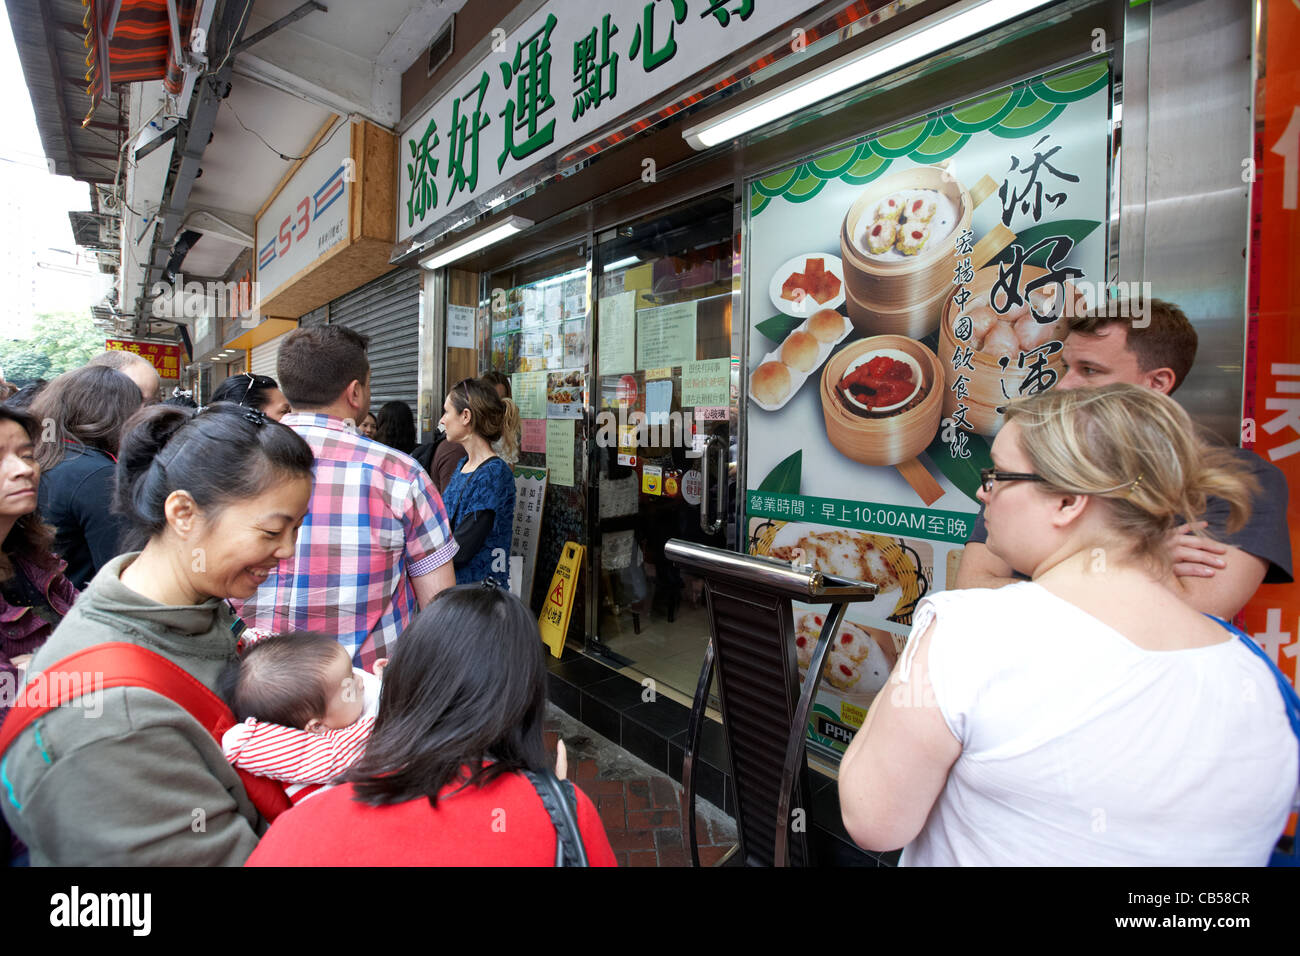 people queuing outside former one dim sum tim ho wan michelin starred restaurant location in mong kok district kowloon hong kong hksar china Stock Photo